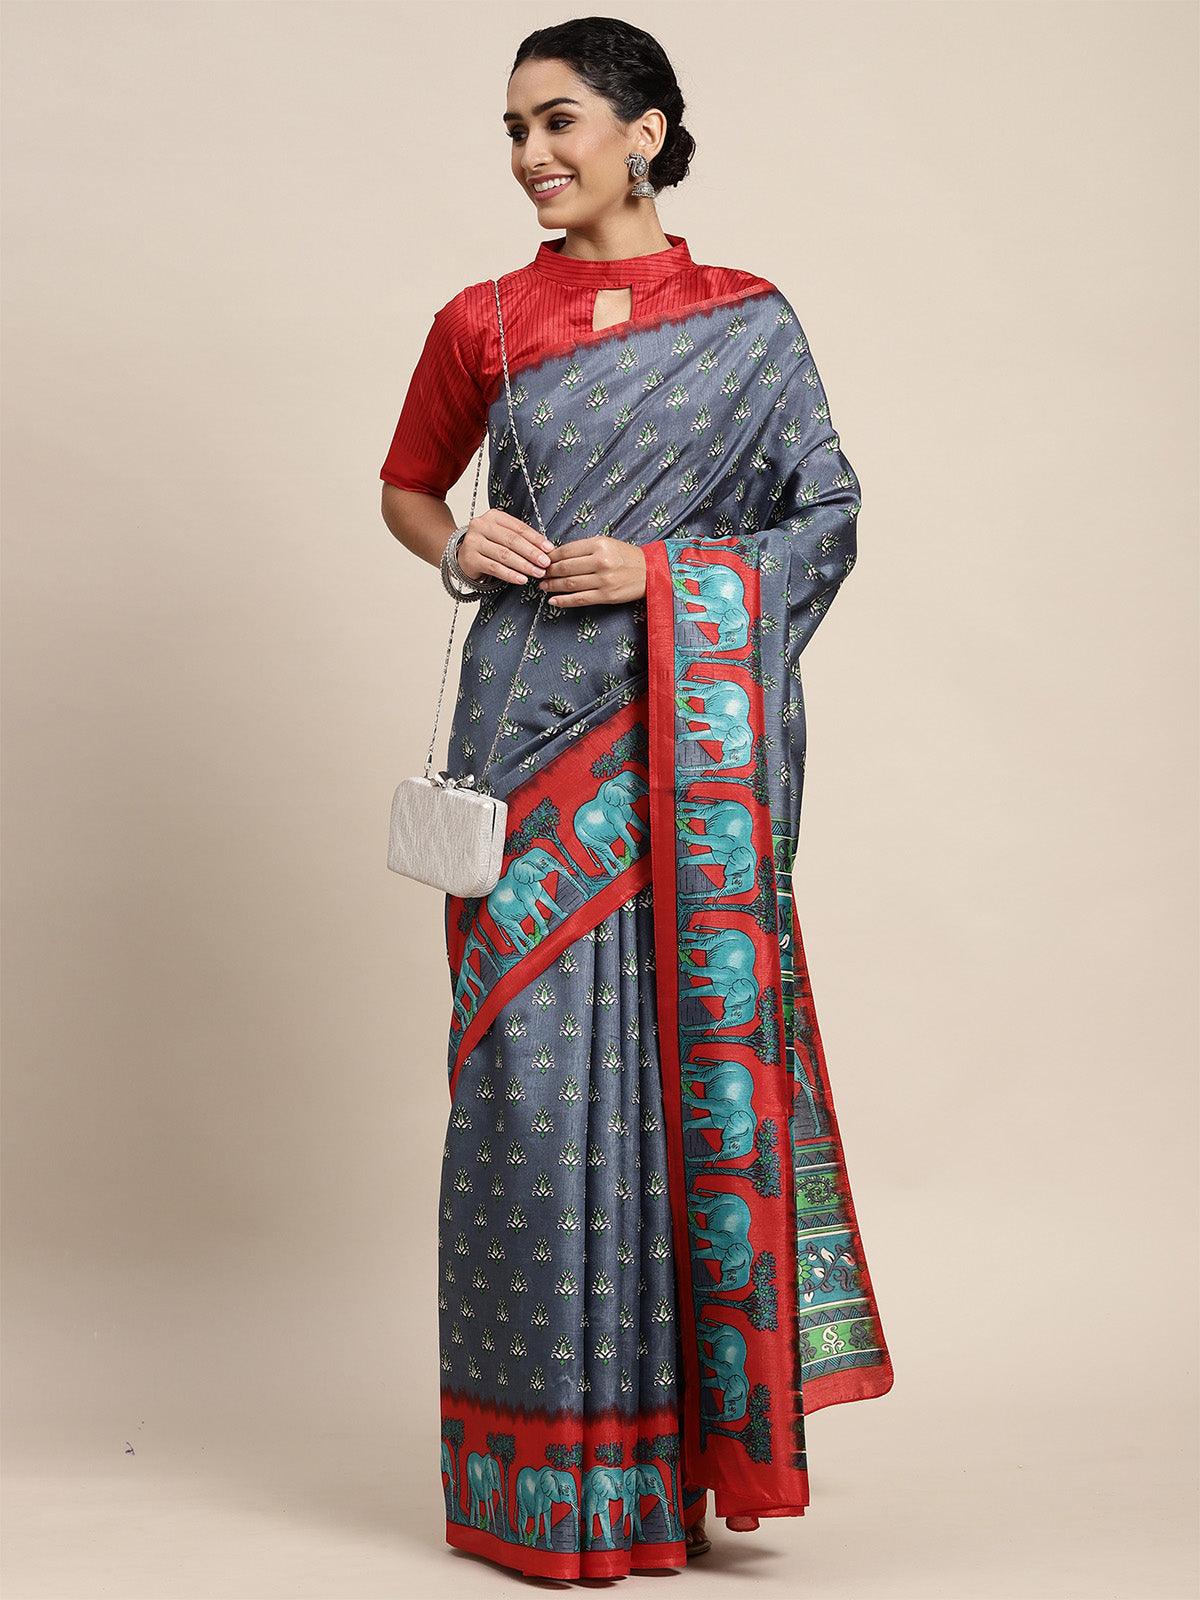 Women's Silk Blend Grey Printed Saree With Blouse Piece - Odette